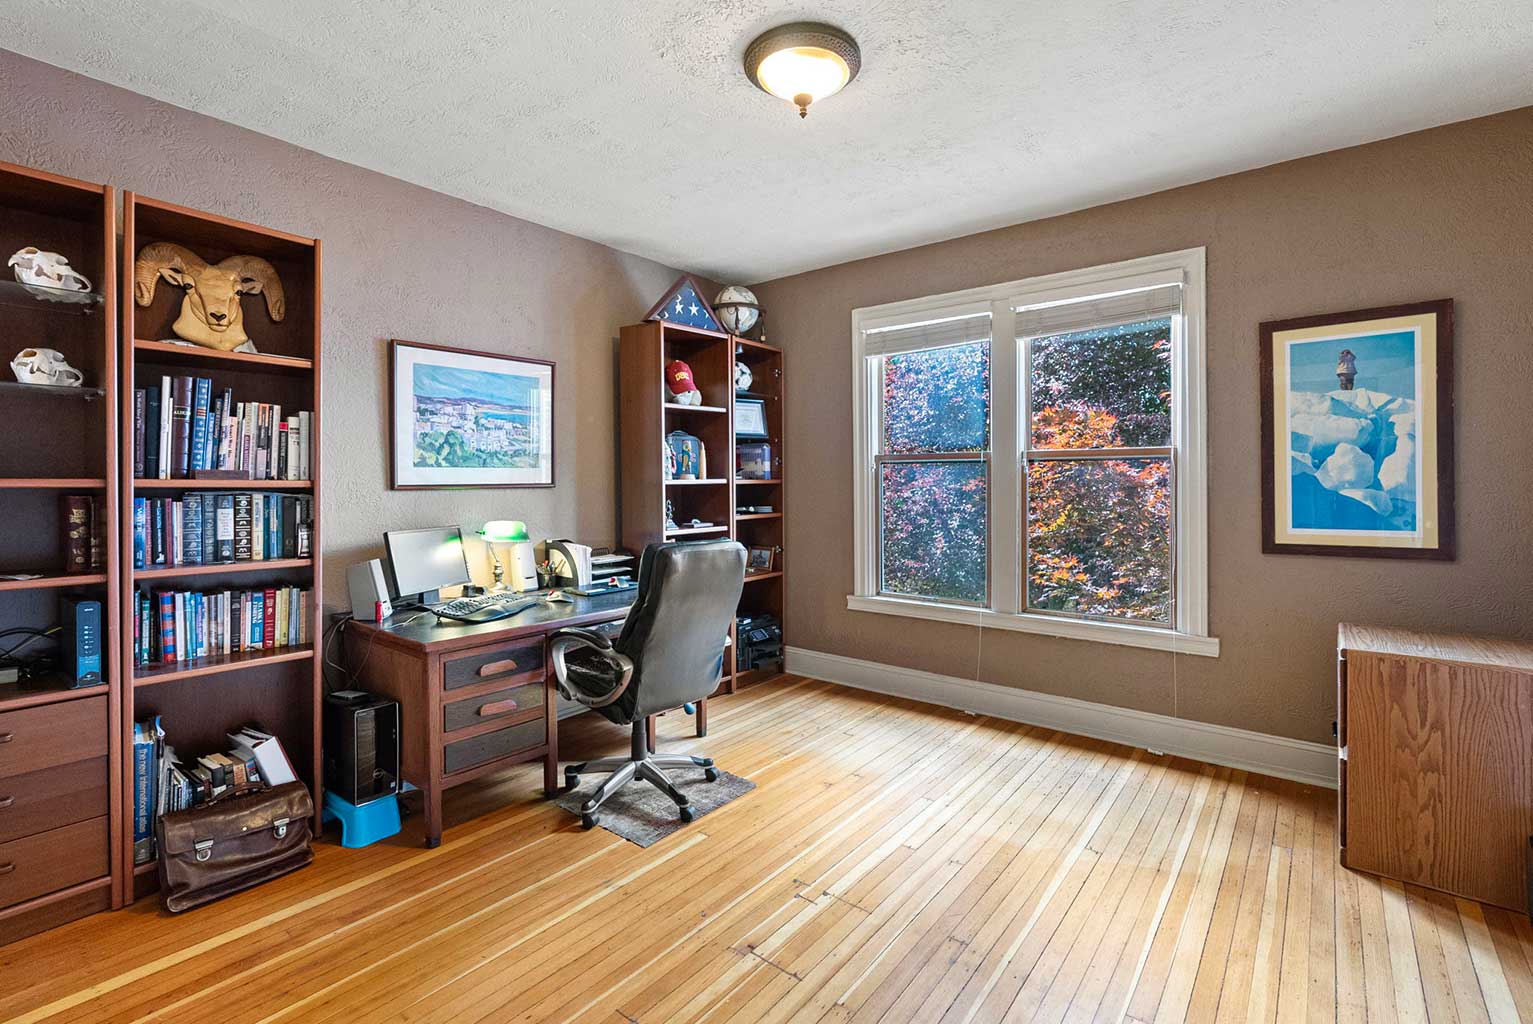 Third bedroom is currently used as an office